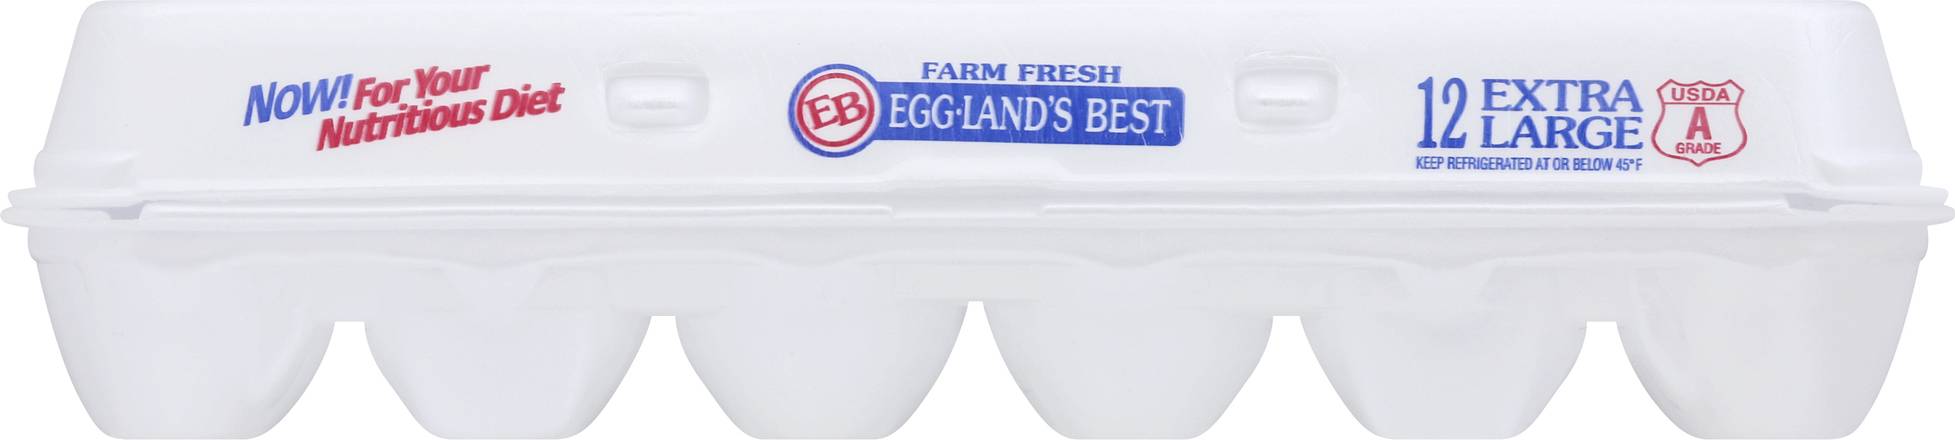 Eggland's Best Extra Large Eggs (12 ct)